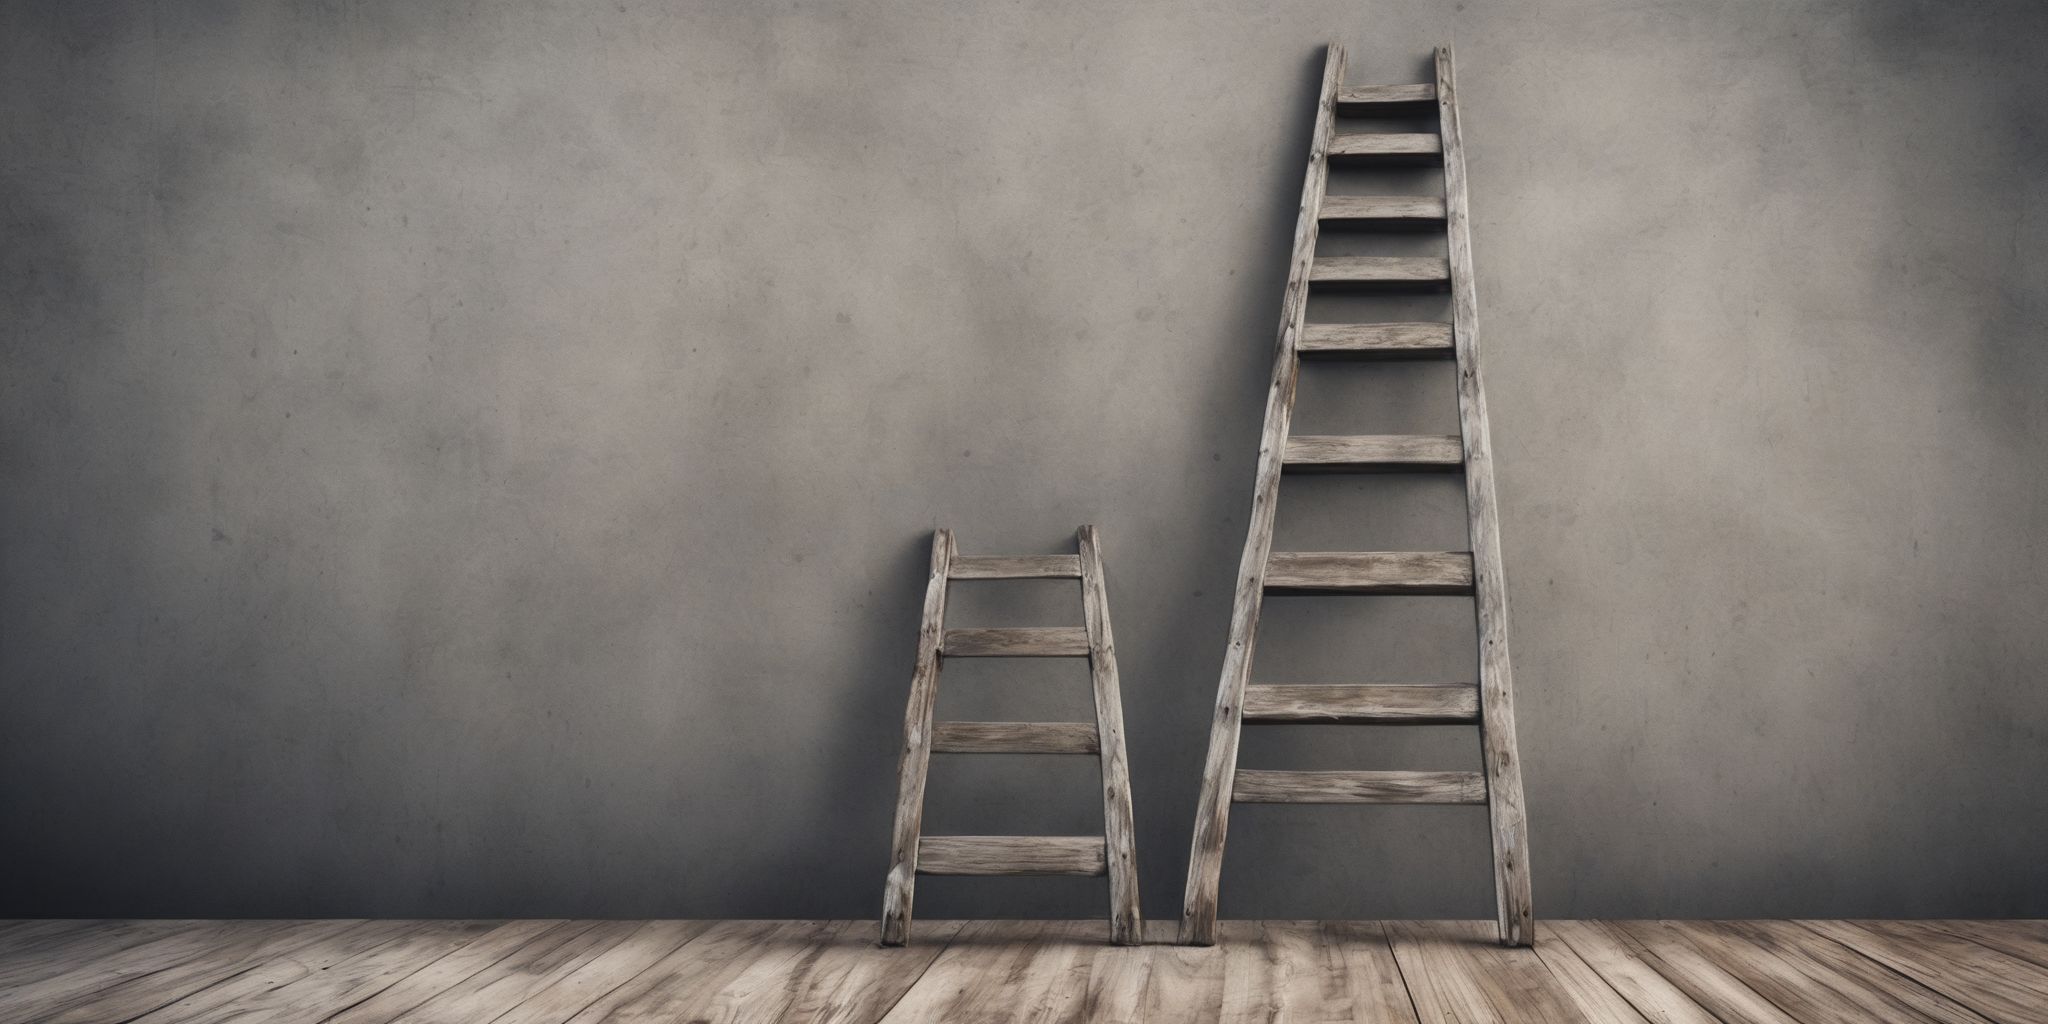 Ladder  in realistic, photographic style